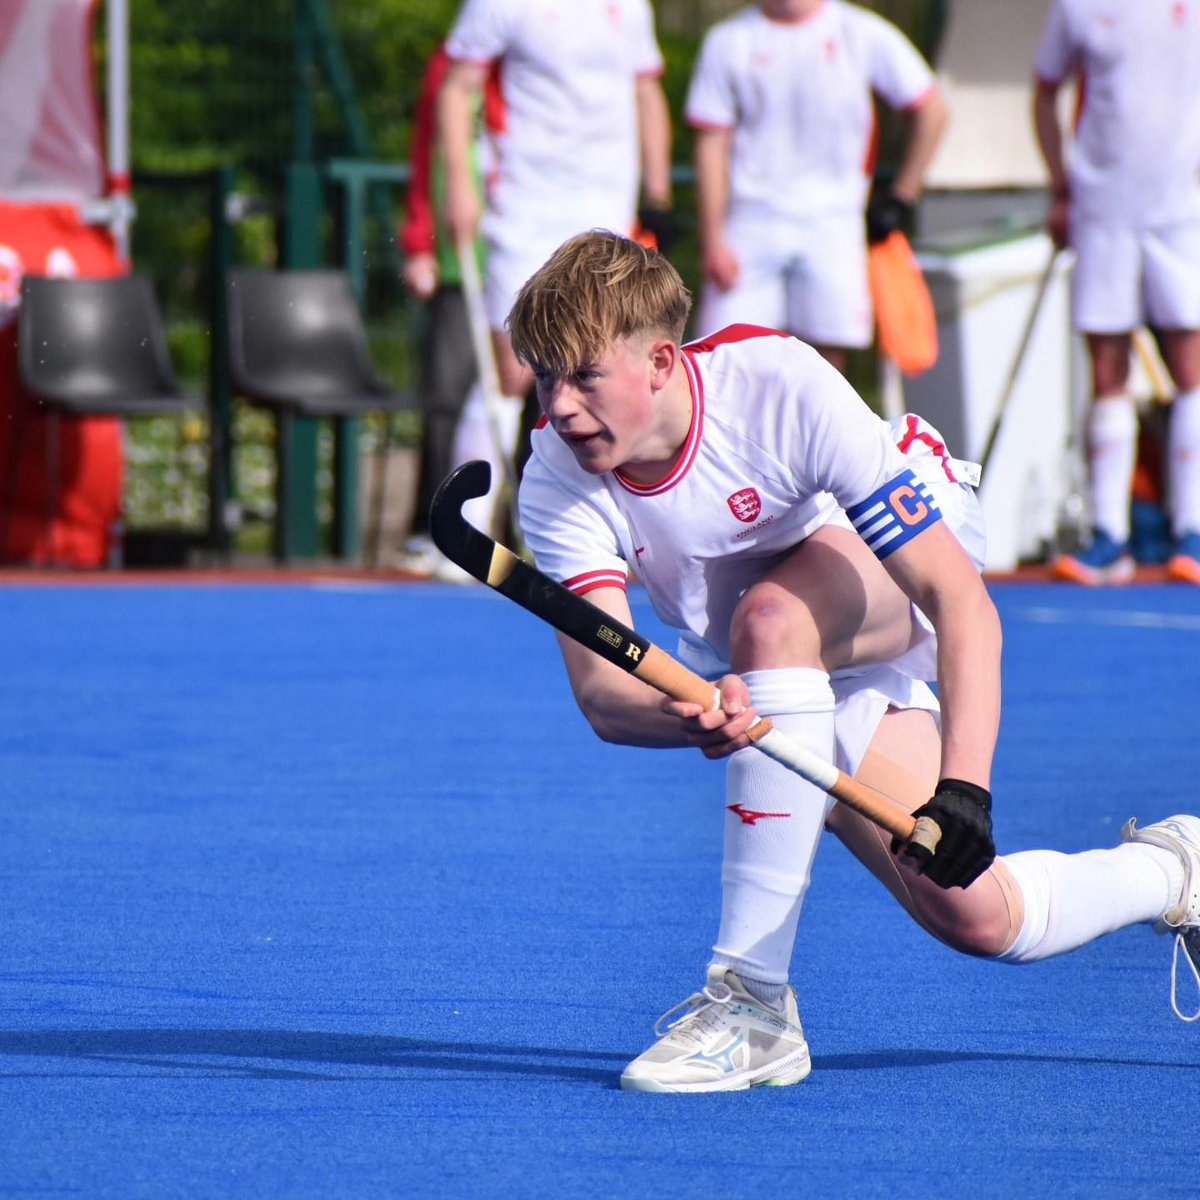 Huge congratulations to our student Ollie who has captained England Hockey U18s in their 4 Nations campaign in France over Easter! Well done Ollie, everyone at KGS is so proud of you😊👏@EnglandHockey @KGS_Sport @KGSheadmaster #ThisIsKGS @KGS_Hockey 📸Photo - Aisha Thabea